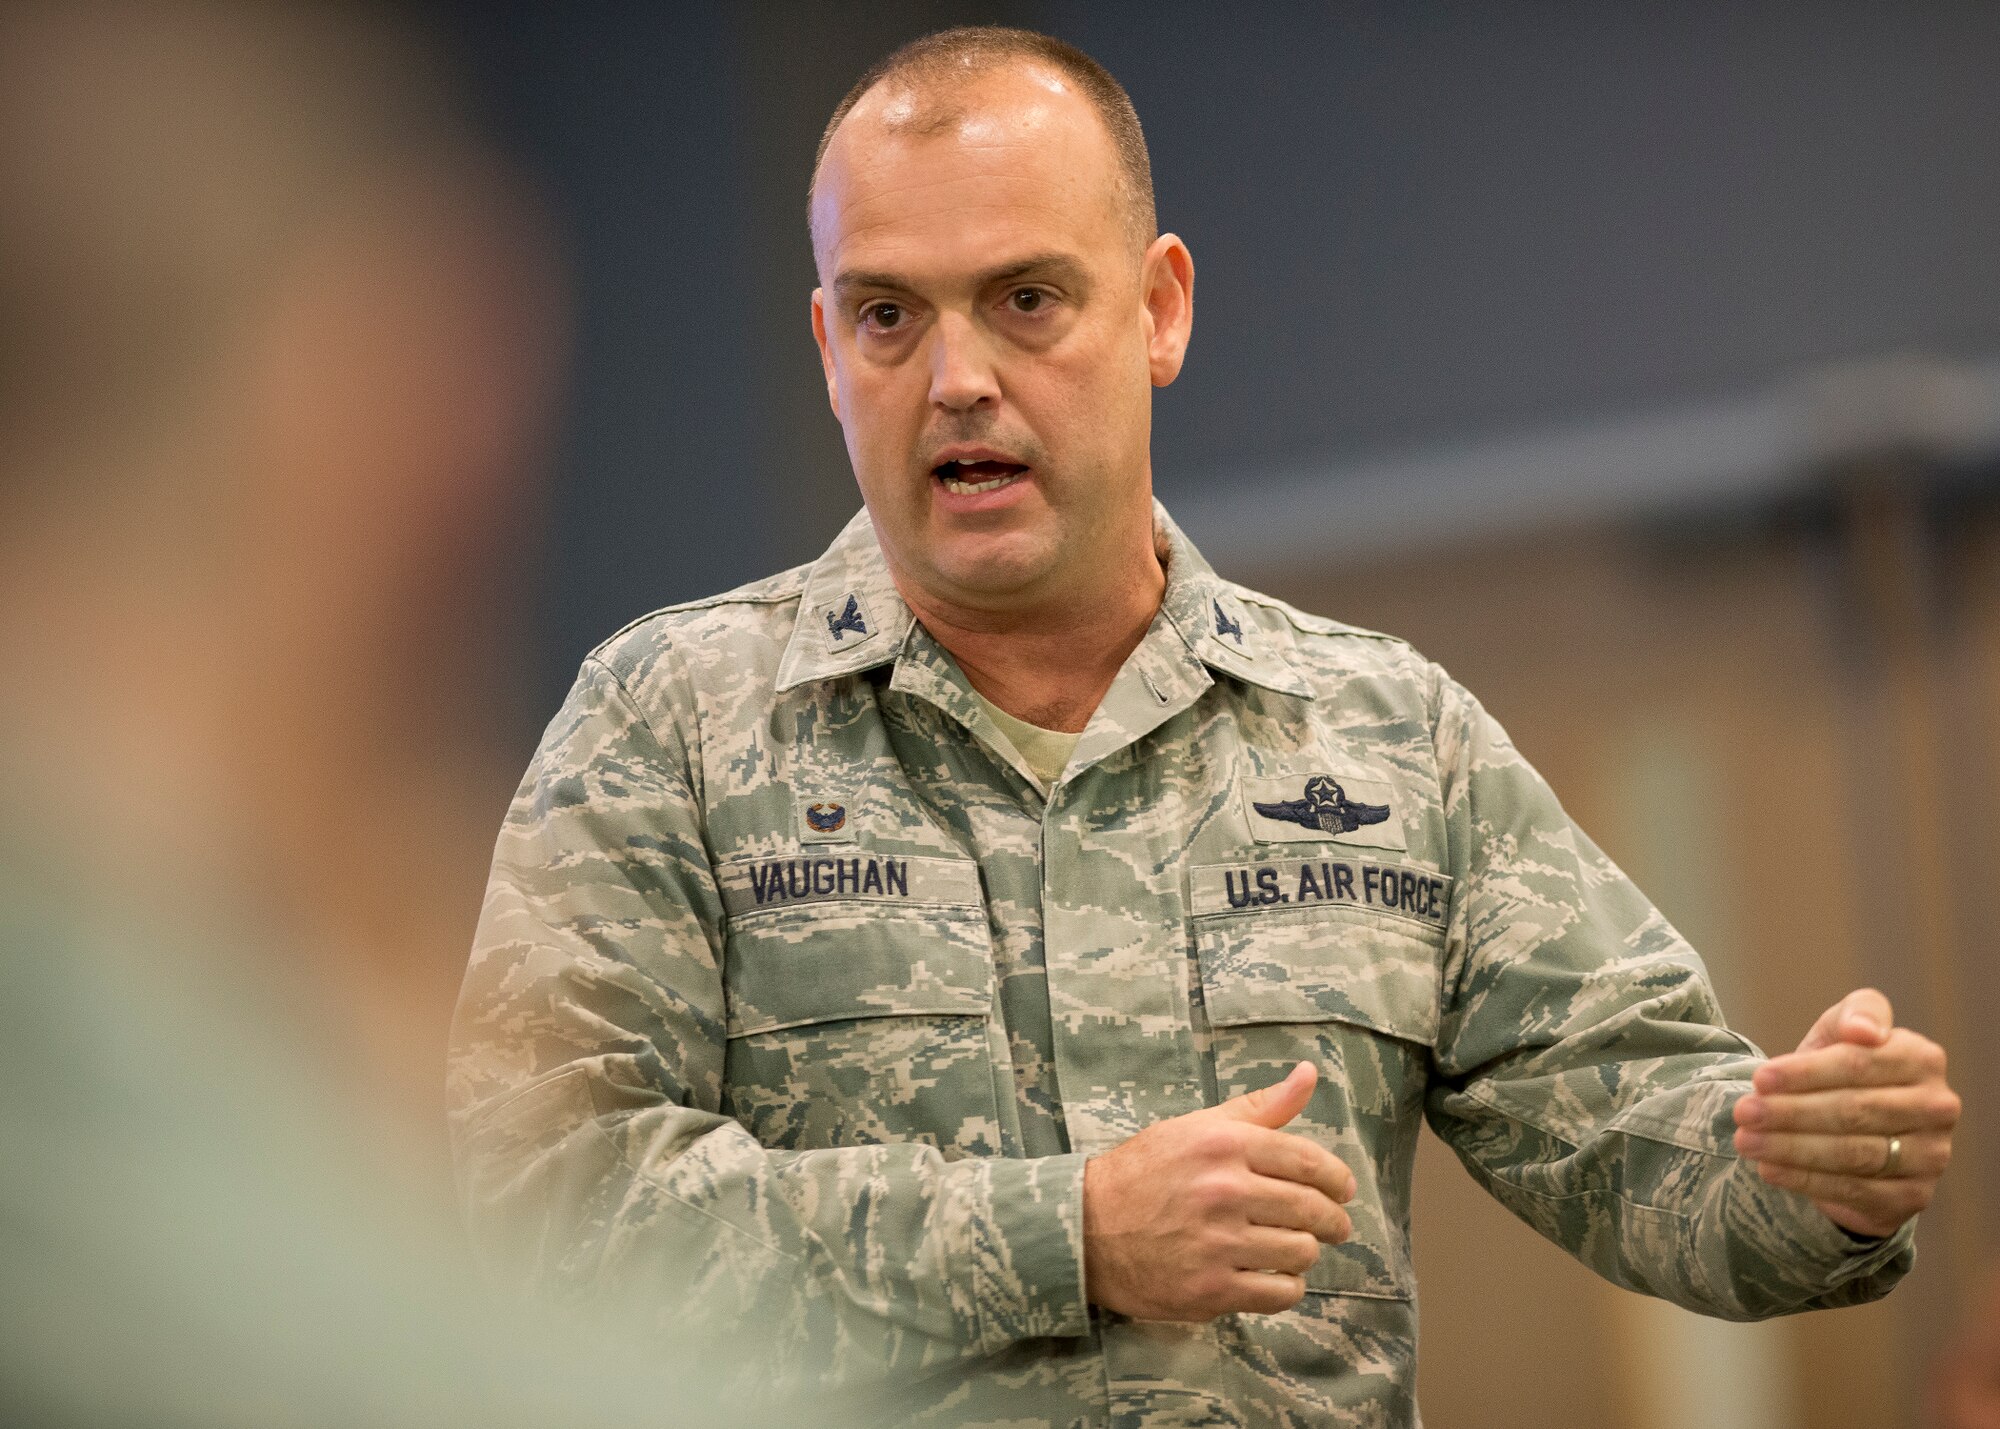 U.S Air Force Col. Edward L. Vaughan, commander of the 156th Airlift Wing, Puerto Rico Air National Guard briefs the PRANG's first State of the Commonwealth to the Air National Guard Readiness Center at Joint Base Andrews Air Force Base, March 1, 2016. (U.S. Air National Guard photo by Master Sgt. Marvin R. Preston)	